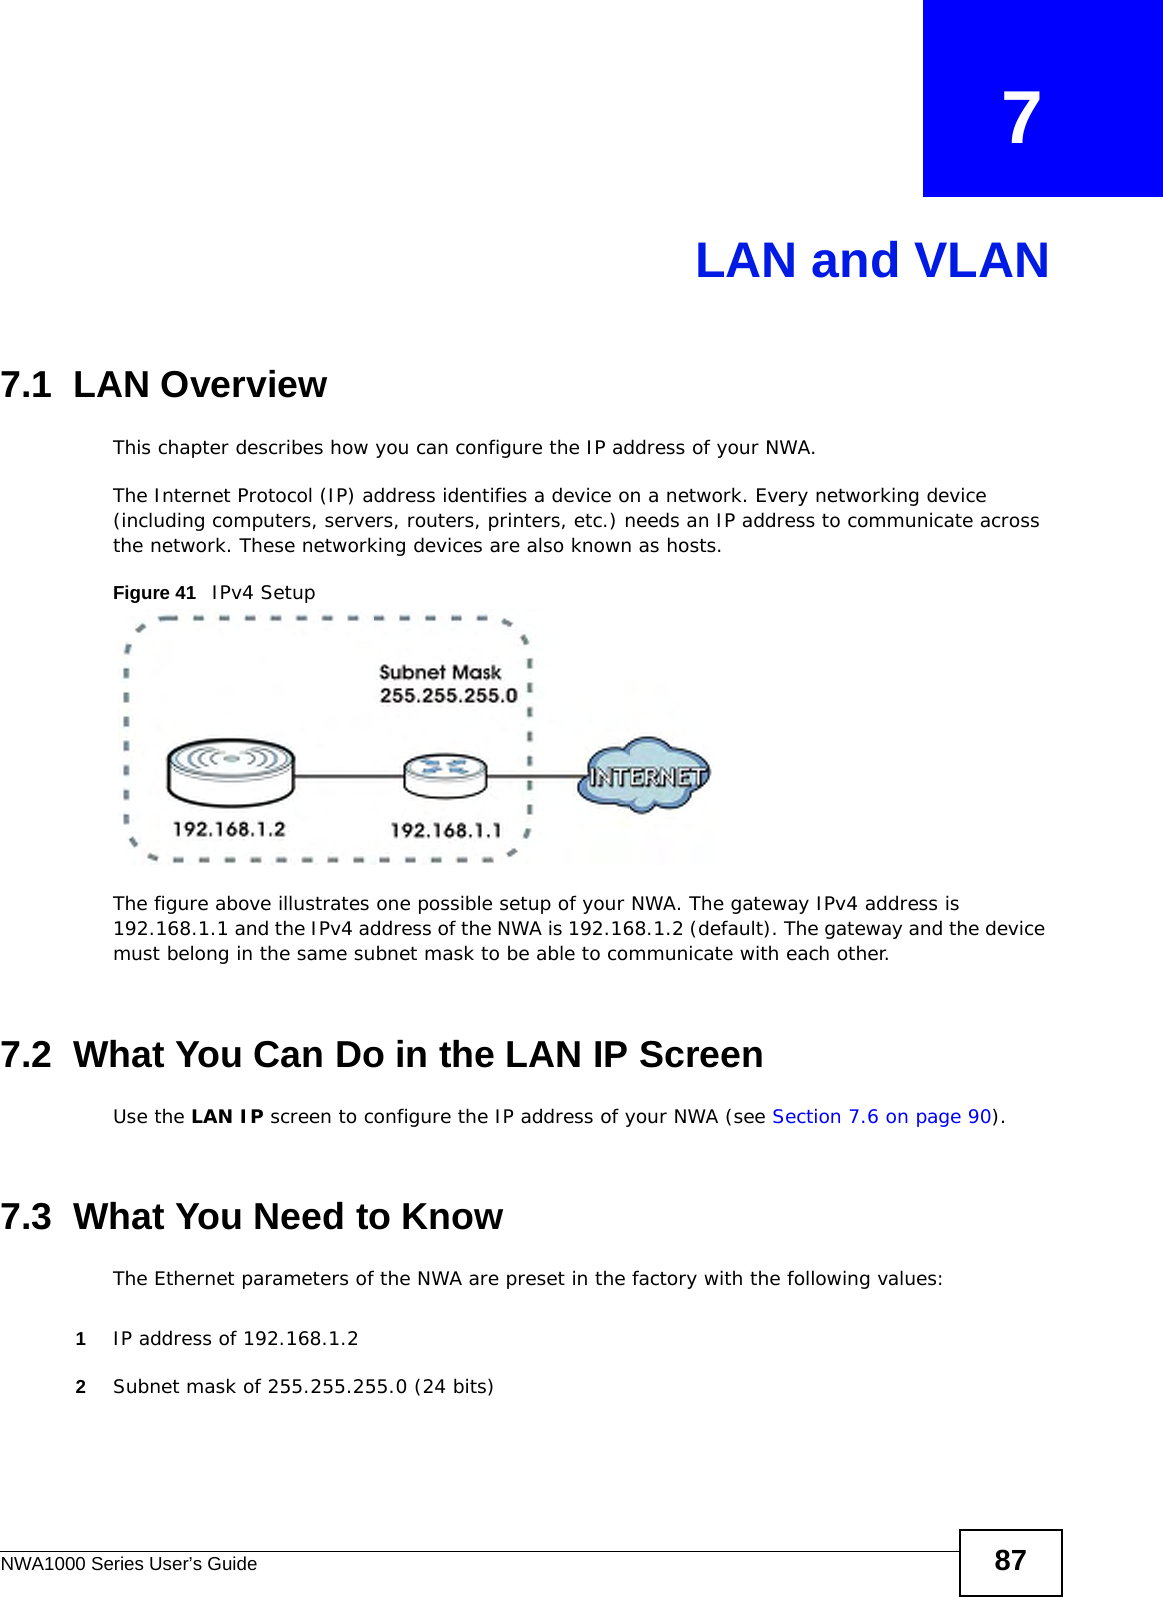 NWA1000 Series User’s Guide 87CHAPTER   7LAN and VLAN7.1  LAN OverviewThis chapter describes how you can configure the IP address of your NWA.The Internet Protocol (IP) address identifies a device on a network. Every networking device (including computers, servers, routers, printers, etc.) needs an IP address to communicate across the network. These networking devices are also known as hosts.Figure 41   IPv4 SetupThe figure above illustrates one possible setup of your NWA. The gateway IPv4 address is 192.168.1.1 and the IPv4 address of the NWA is 192.168.1.2 (default). The gateway and the device must belong in the same subnet mask to be able to communicate with each other.7.2  What You Can Do in the LAN IP ScreenUse the LAN IP screen to configure the IP address of your NWA (see Section 7.6 on page 90).7.3  What You Need to KnowThe Ethernet parameters of the NWA are preset in the factory with the following values:1IP address of 192.168.1.22Subnet mask of 255.255.255.0 (24 bits)